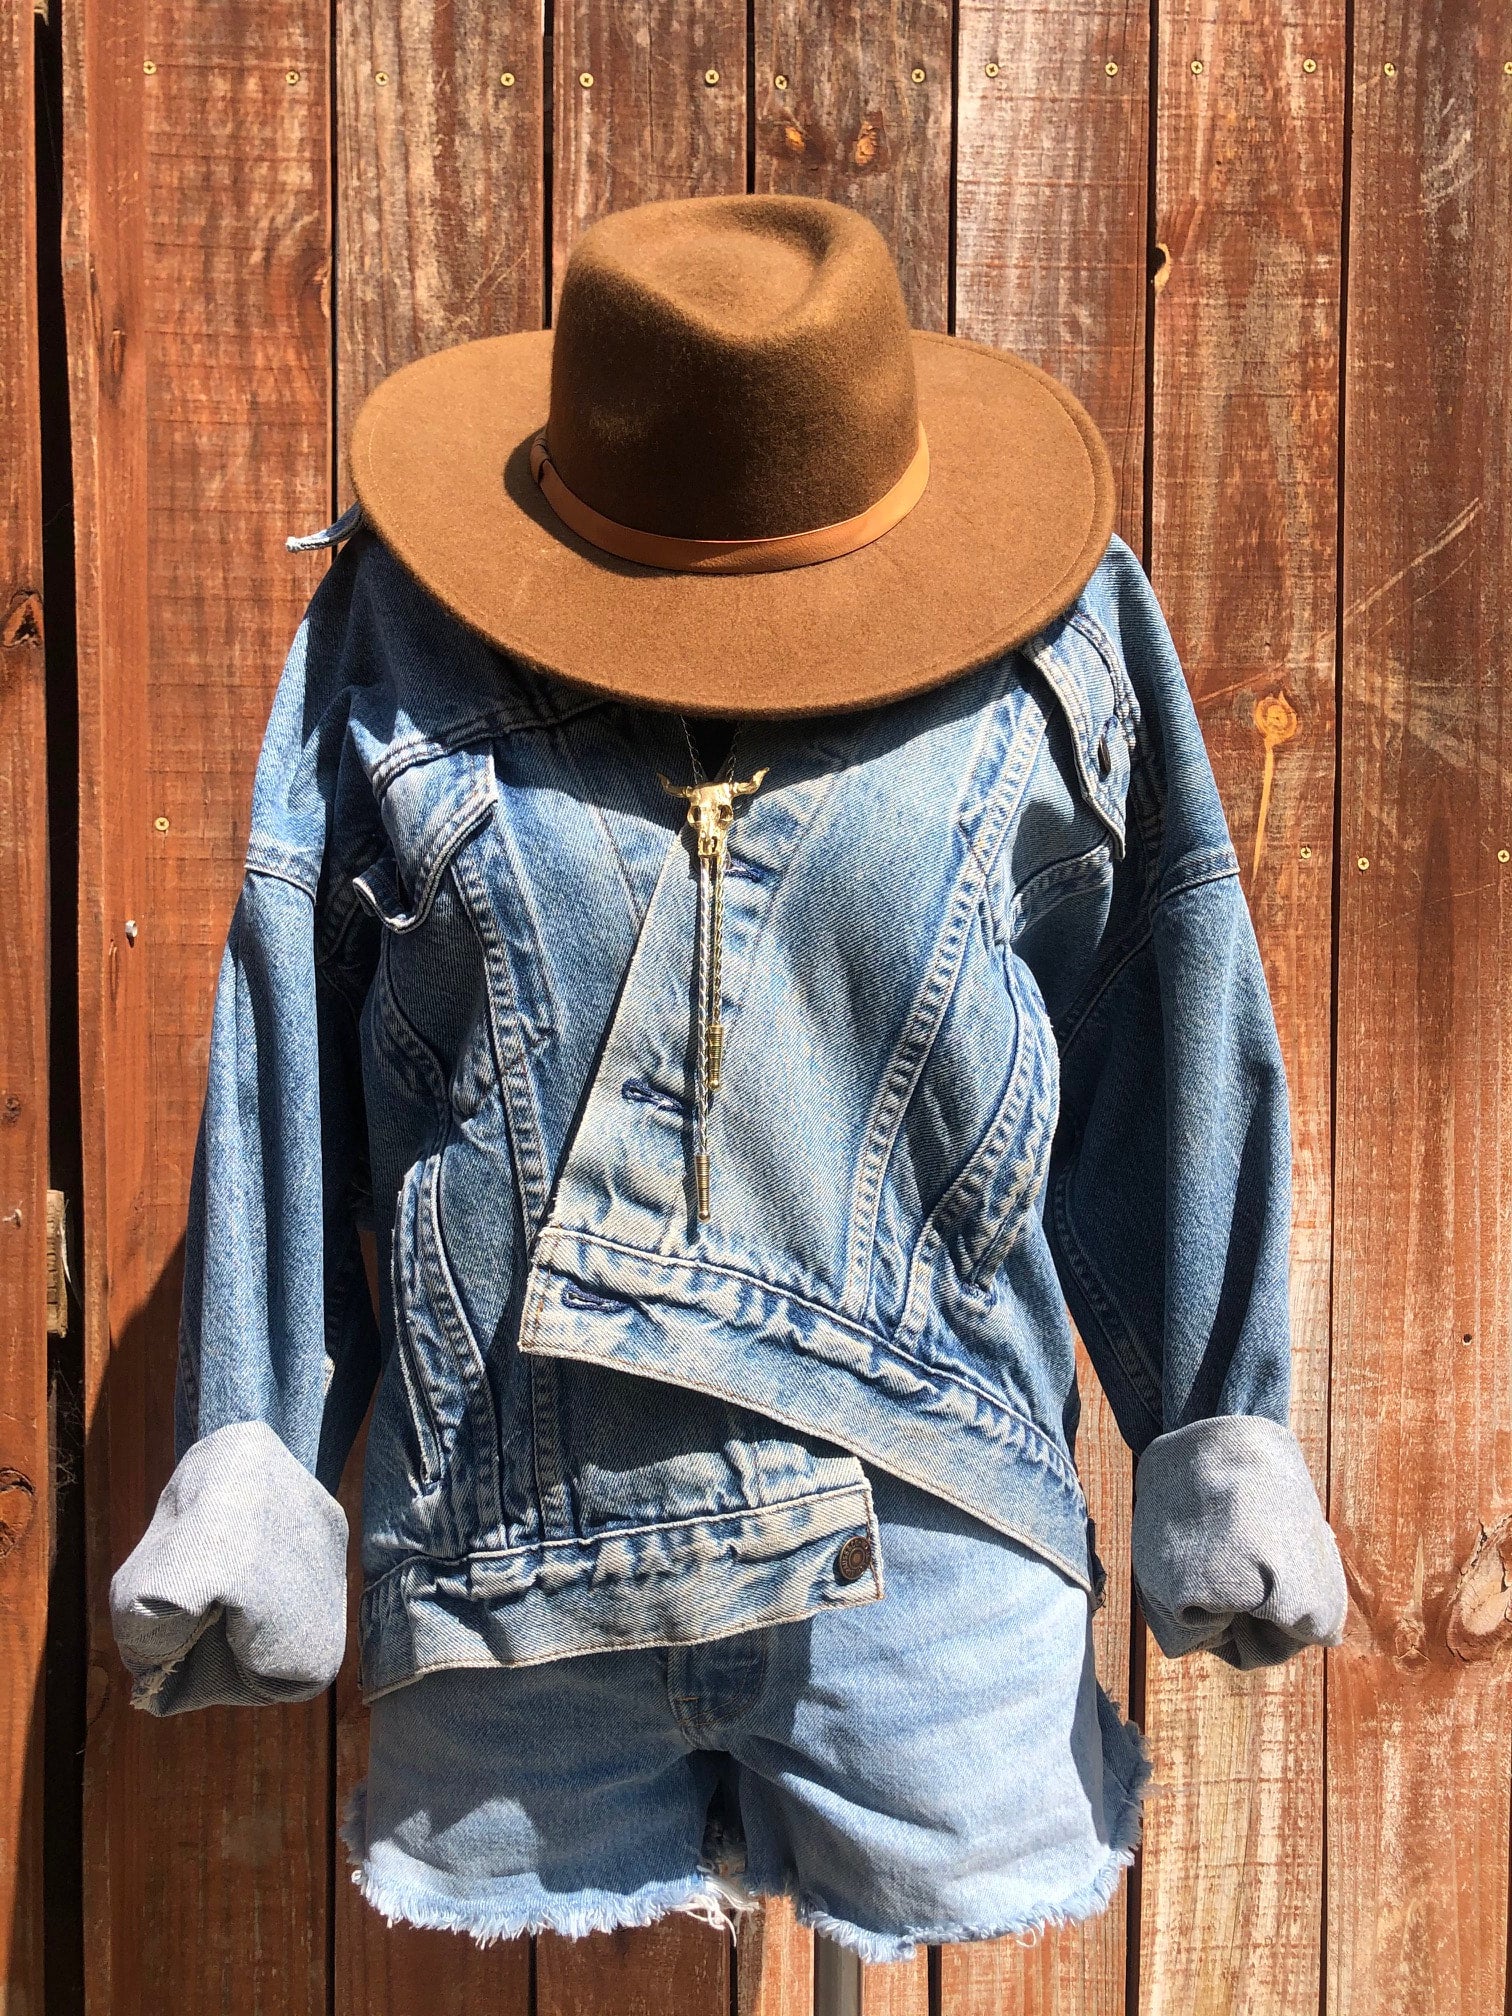 Vintage 80s Jacket: 80s -Contempo Casuals- Womens white and dark blue  cotton acid wash denim with dark gold topstitching, totally 80s longsleeve  jeans style jacket with front metal button closure, 2 button